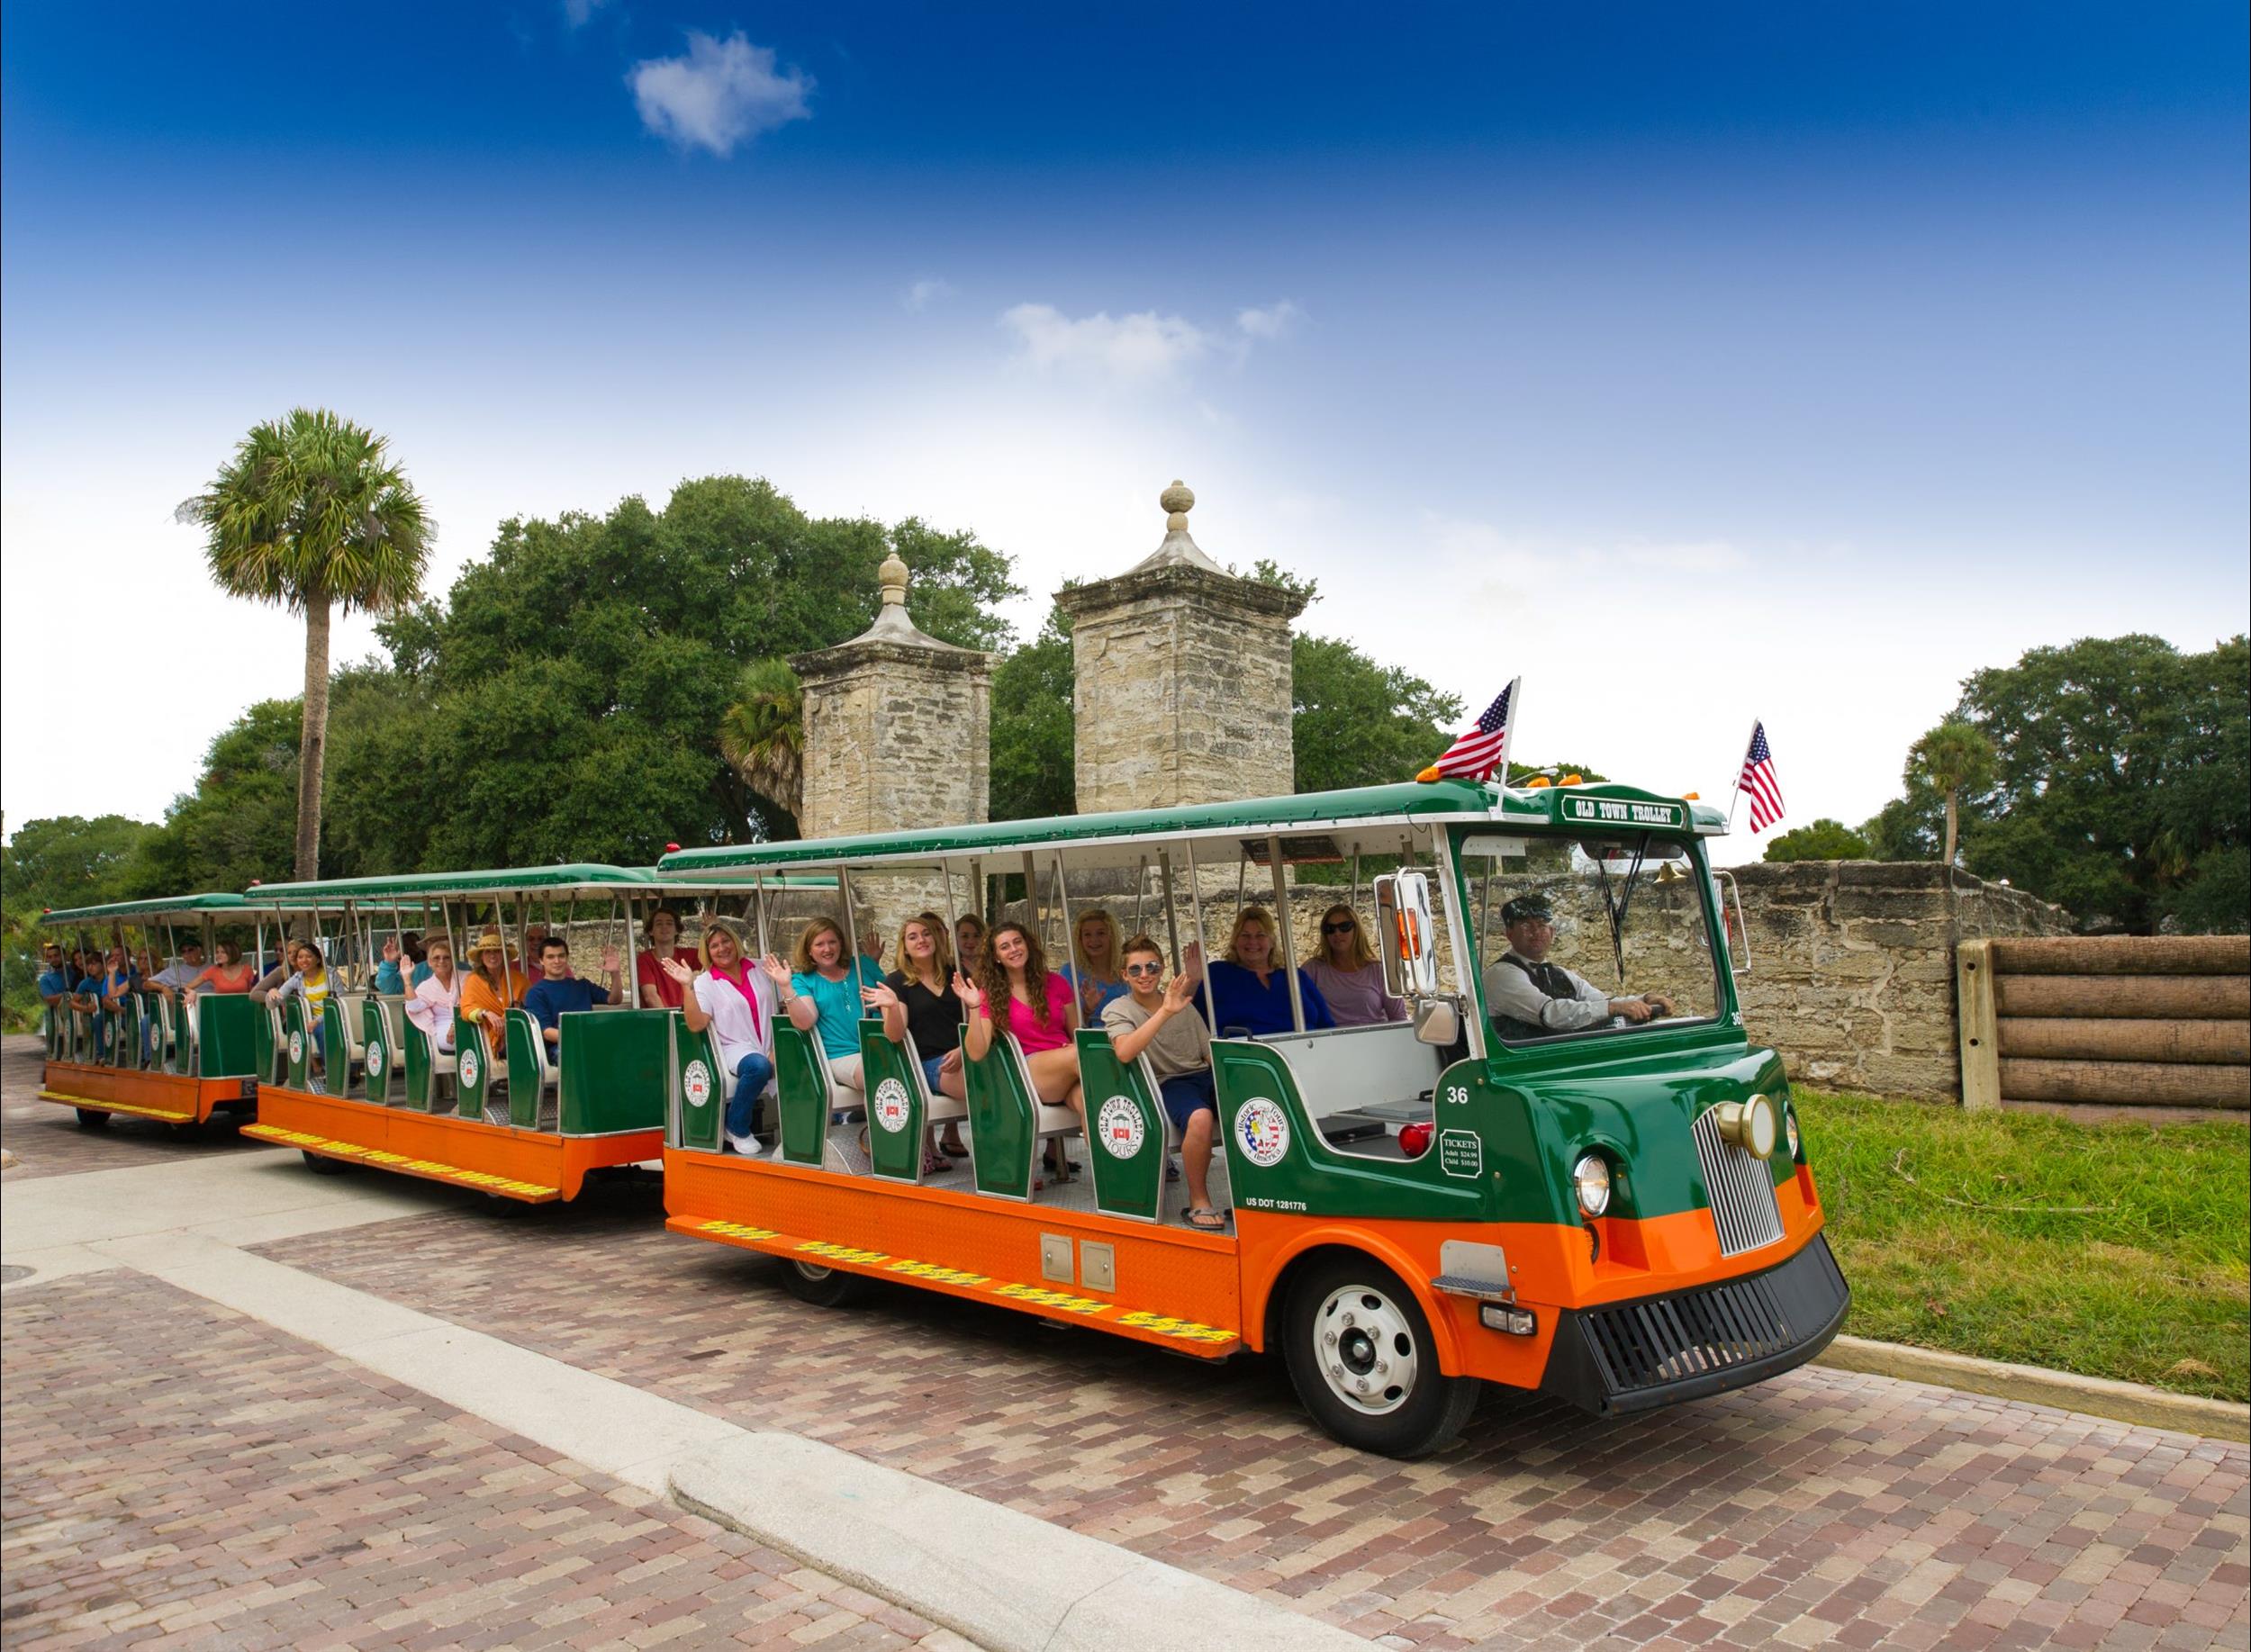 Old Town Trolley in front of St. Augustine City Gates